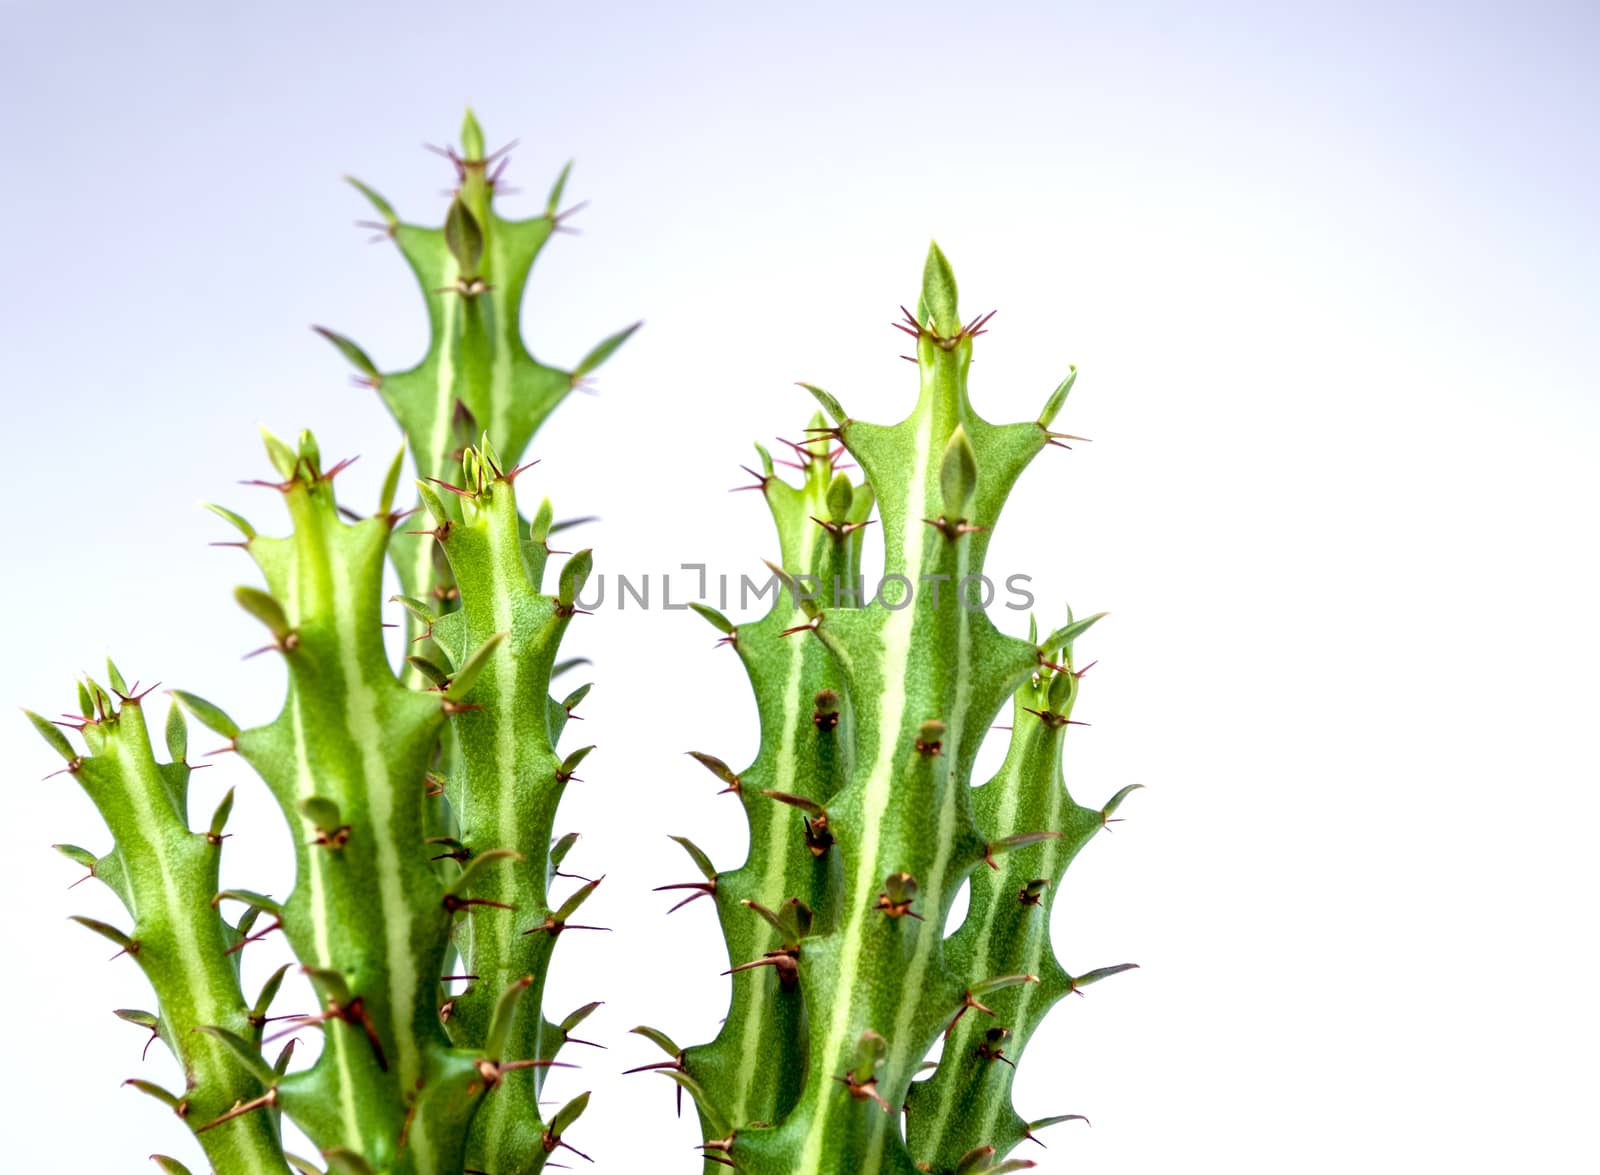 Euphorbia knuthii growing on the white background by Satakorn